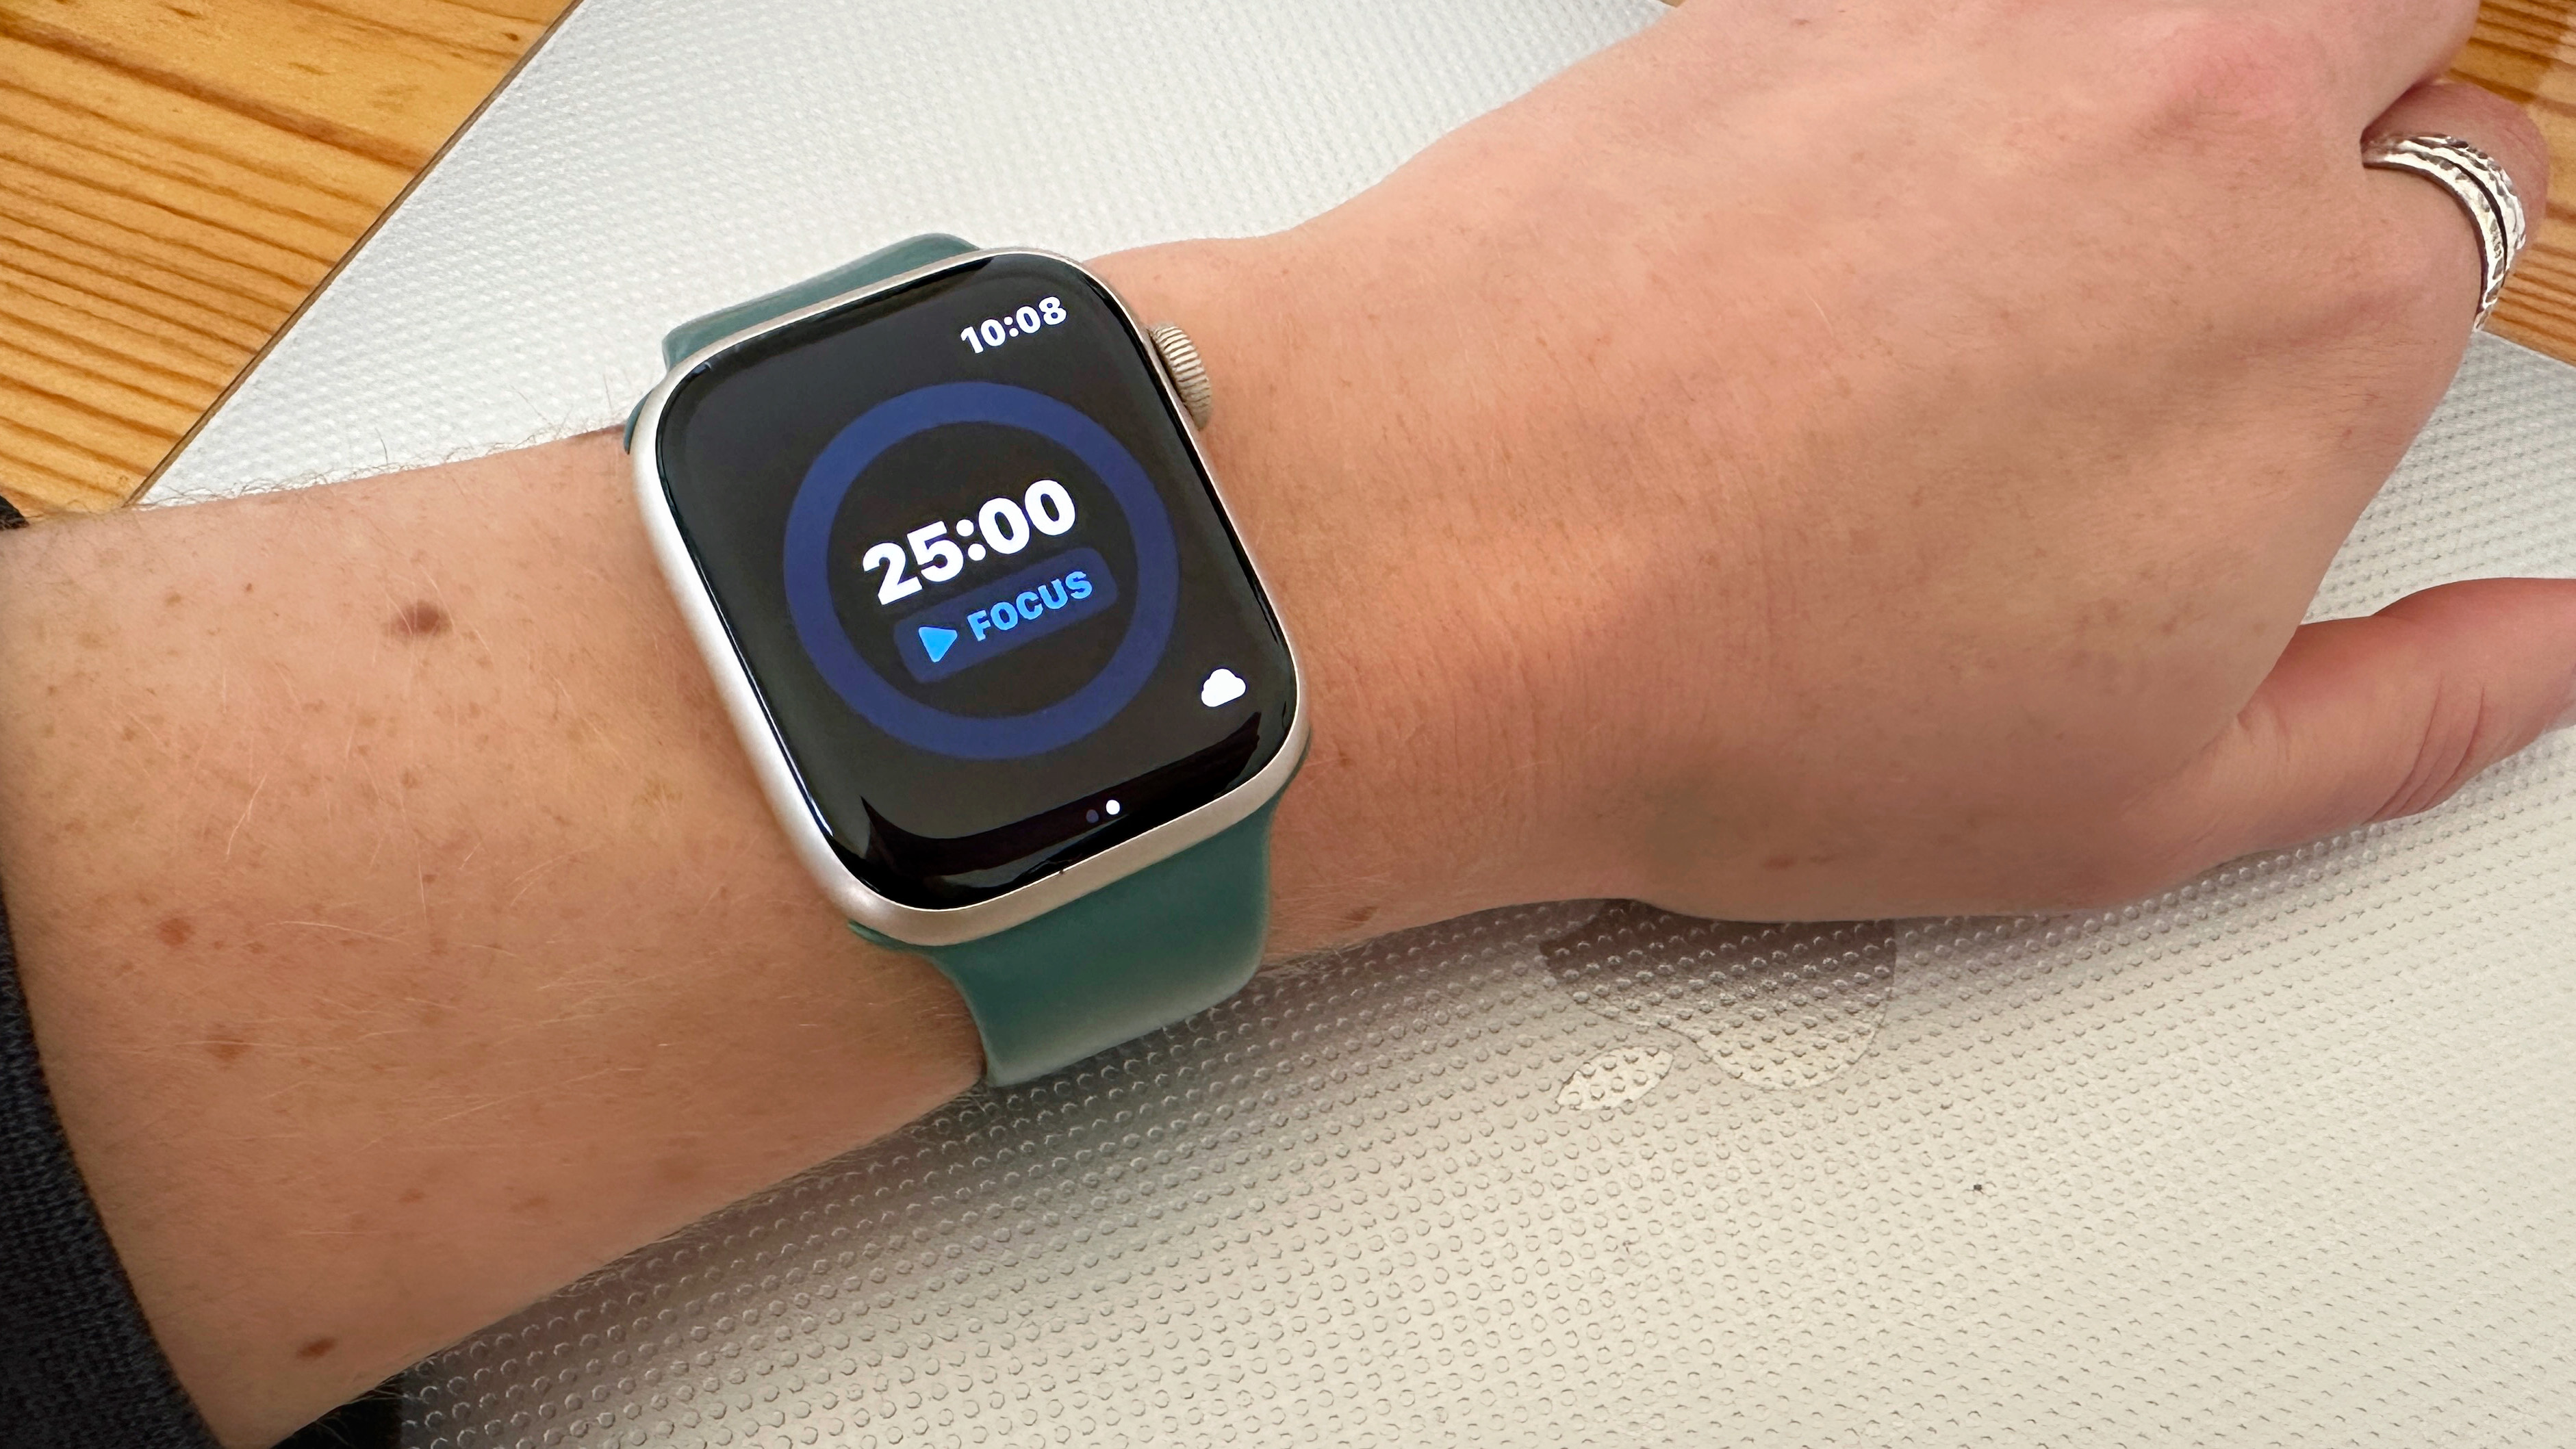 I’ve been using my Apple Watch to manage my ADHD — here’s what’s been working for me (plus time management tips that could help almost anyone)